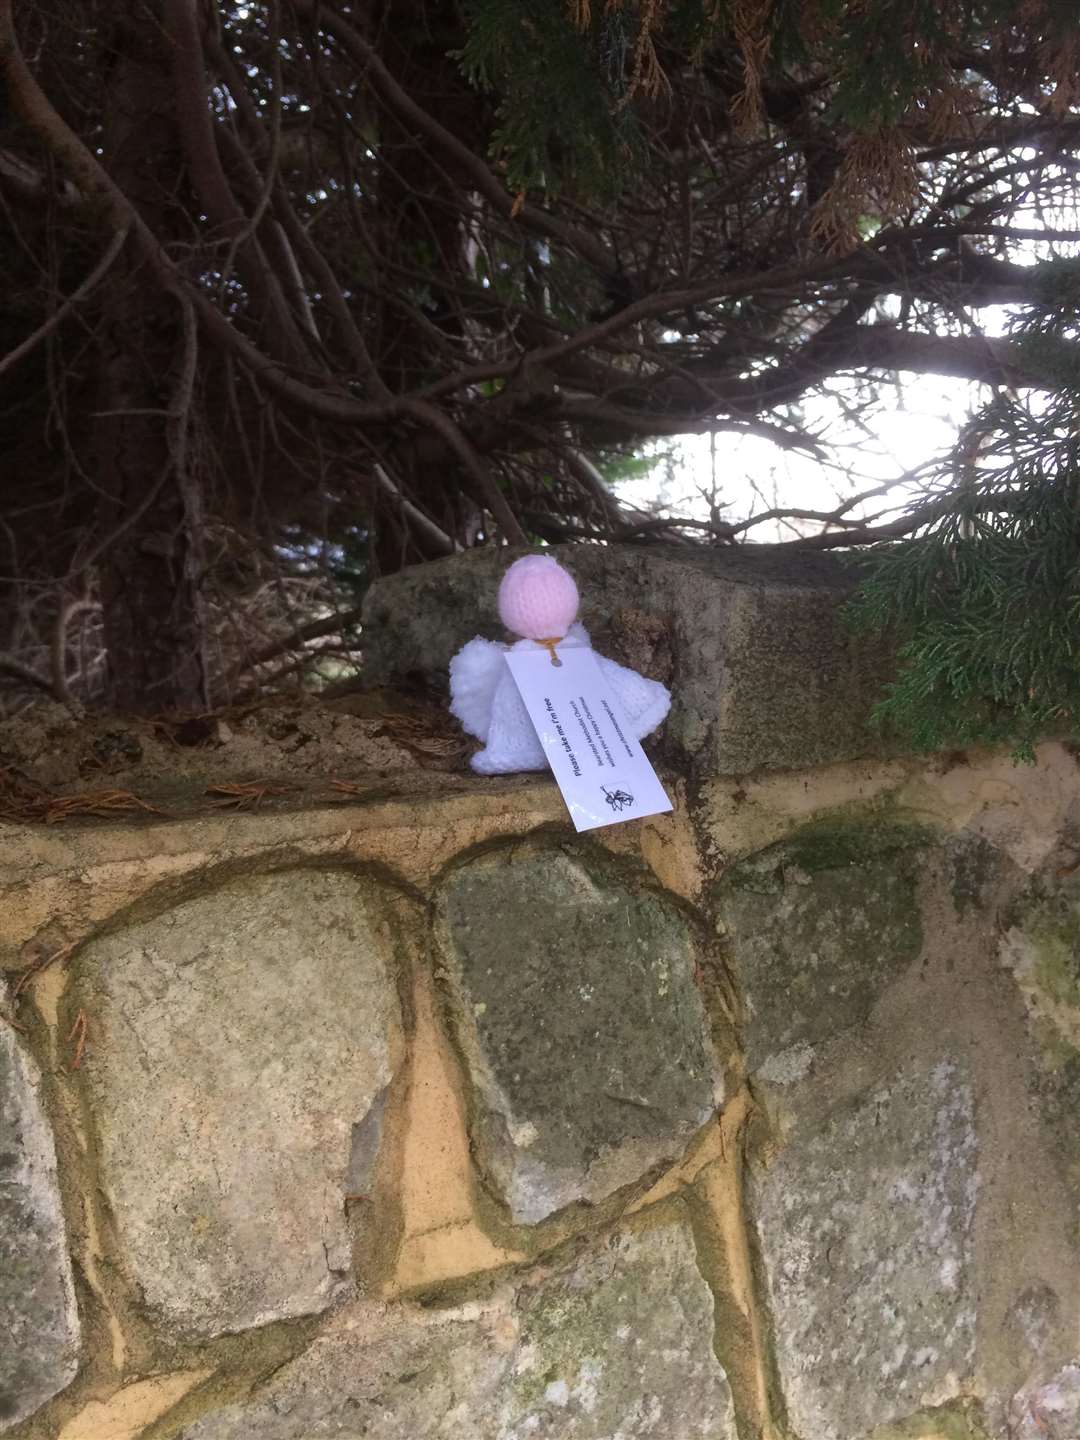 One of the angels left by the Methodist church waiting to be found in Bearsted